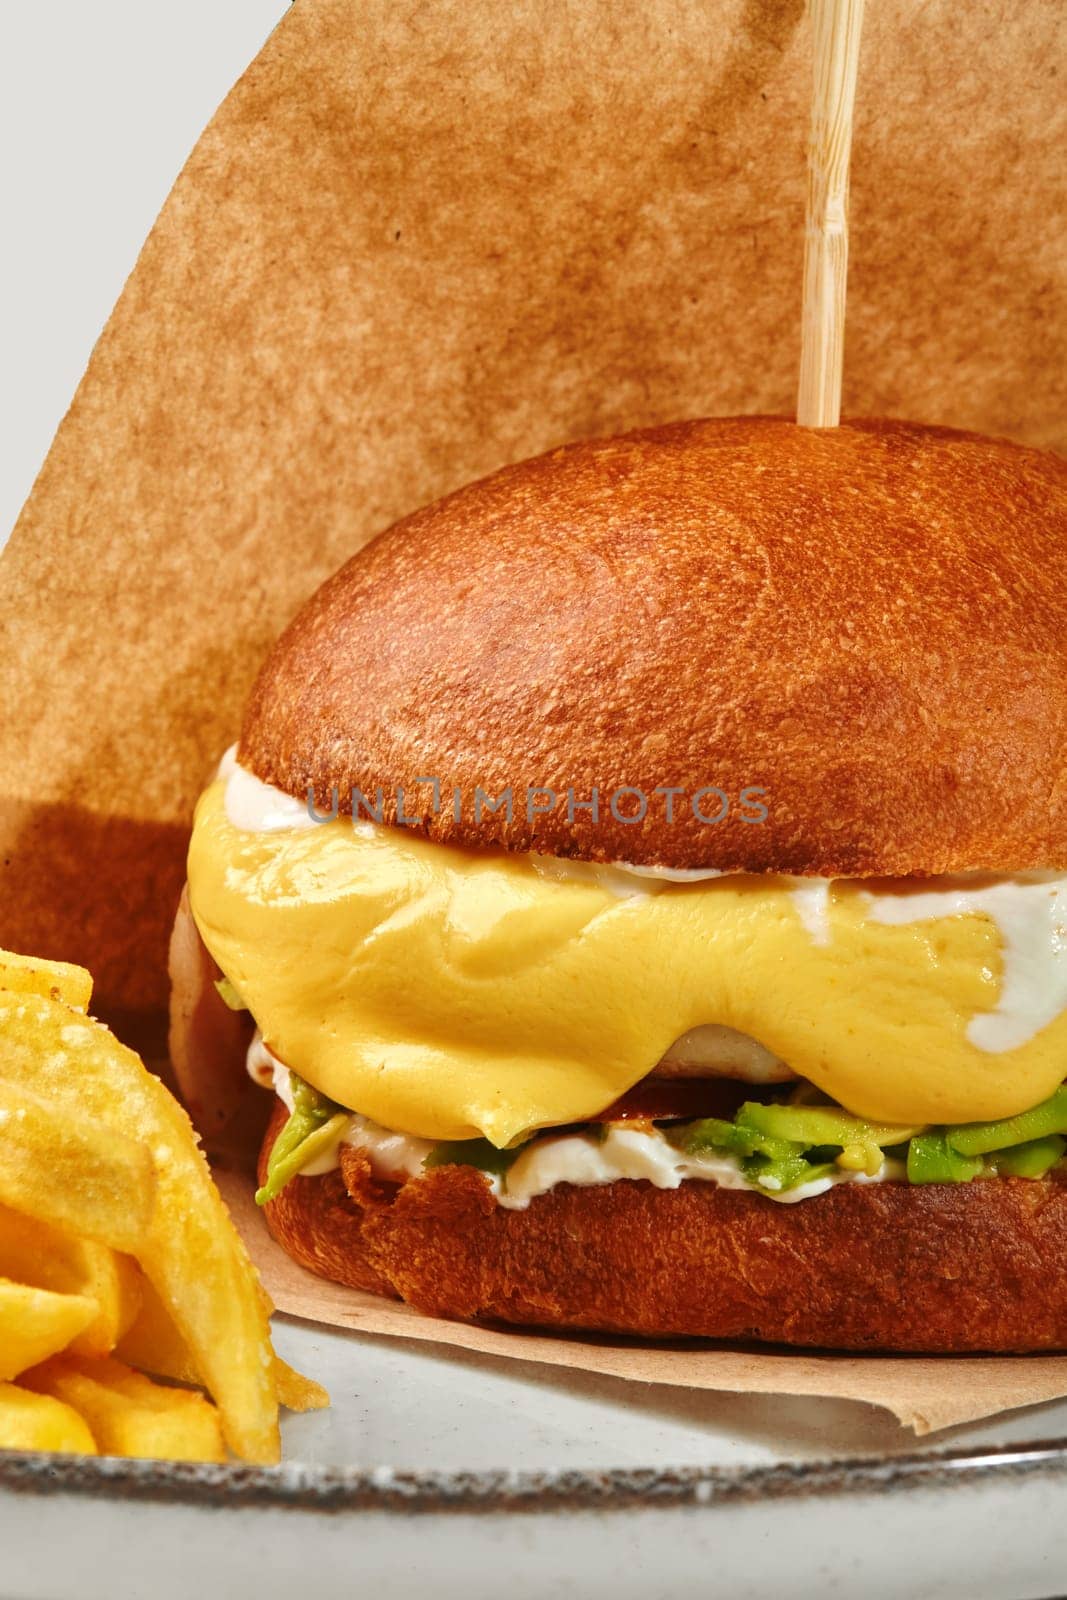 Close-up of delicious burger in browned bun with chicken patty, avocado and creamy cheese sauce in craft paper wrapper served on plate with golden fries